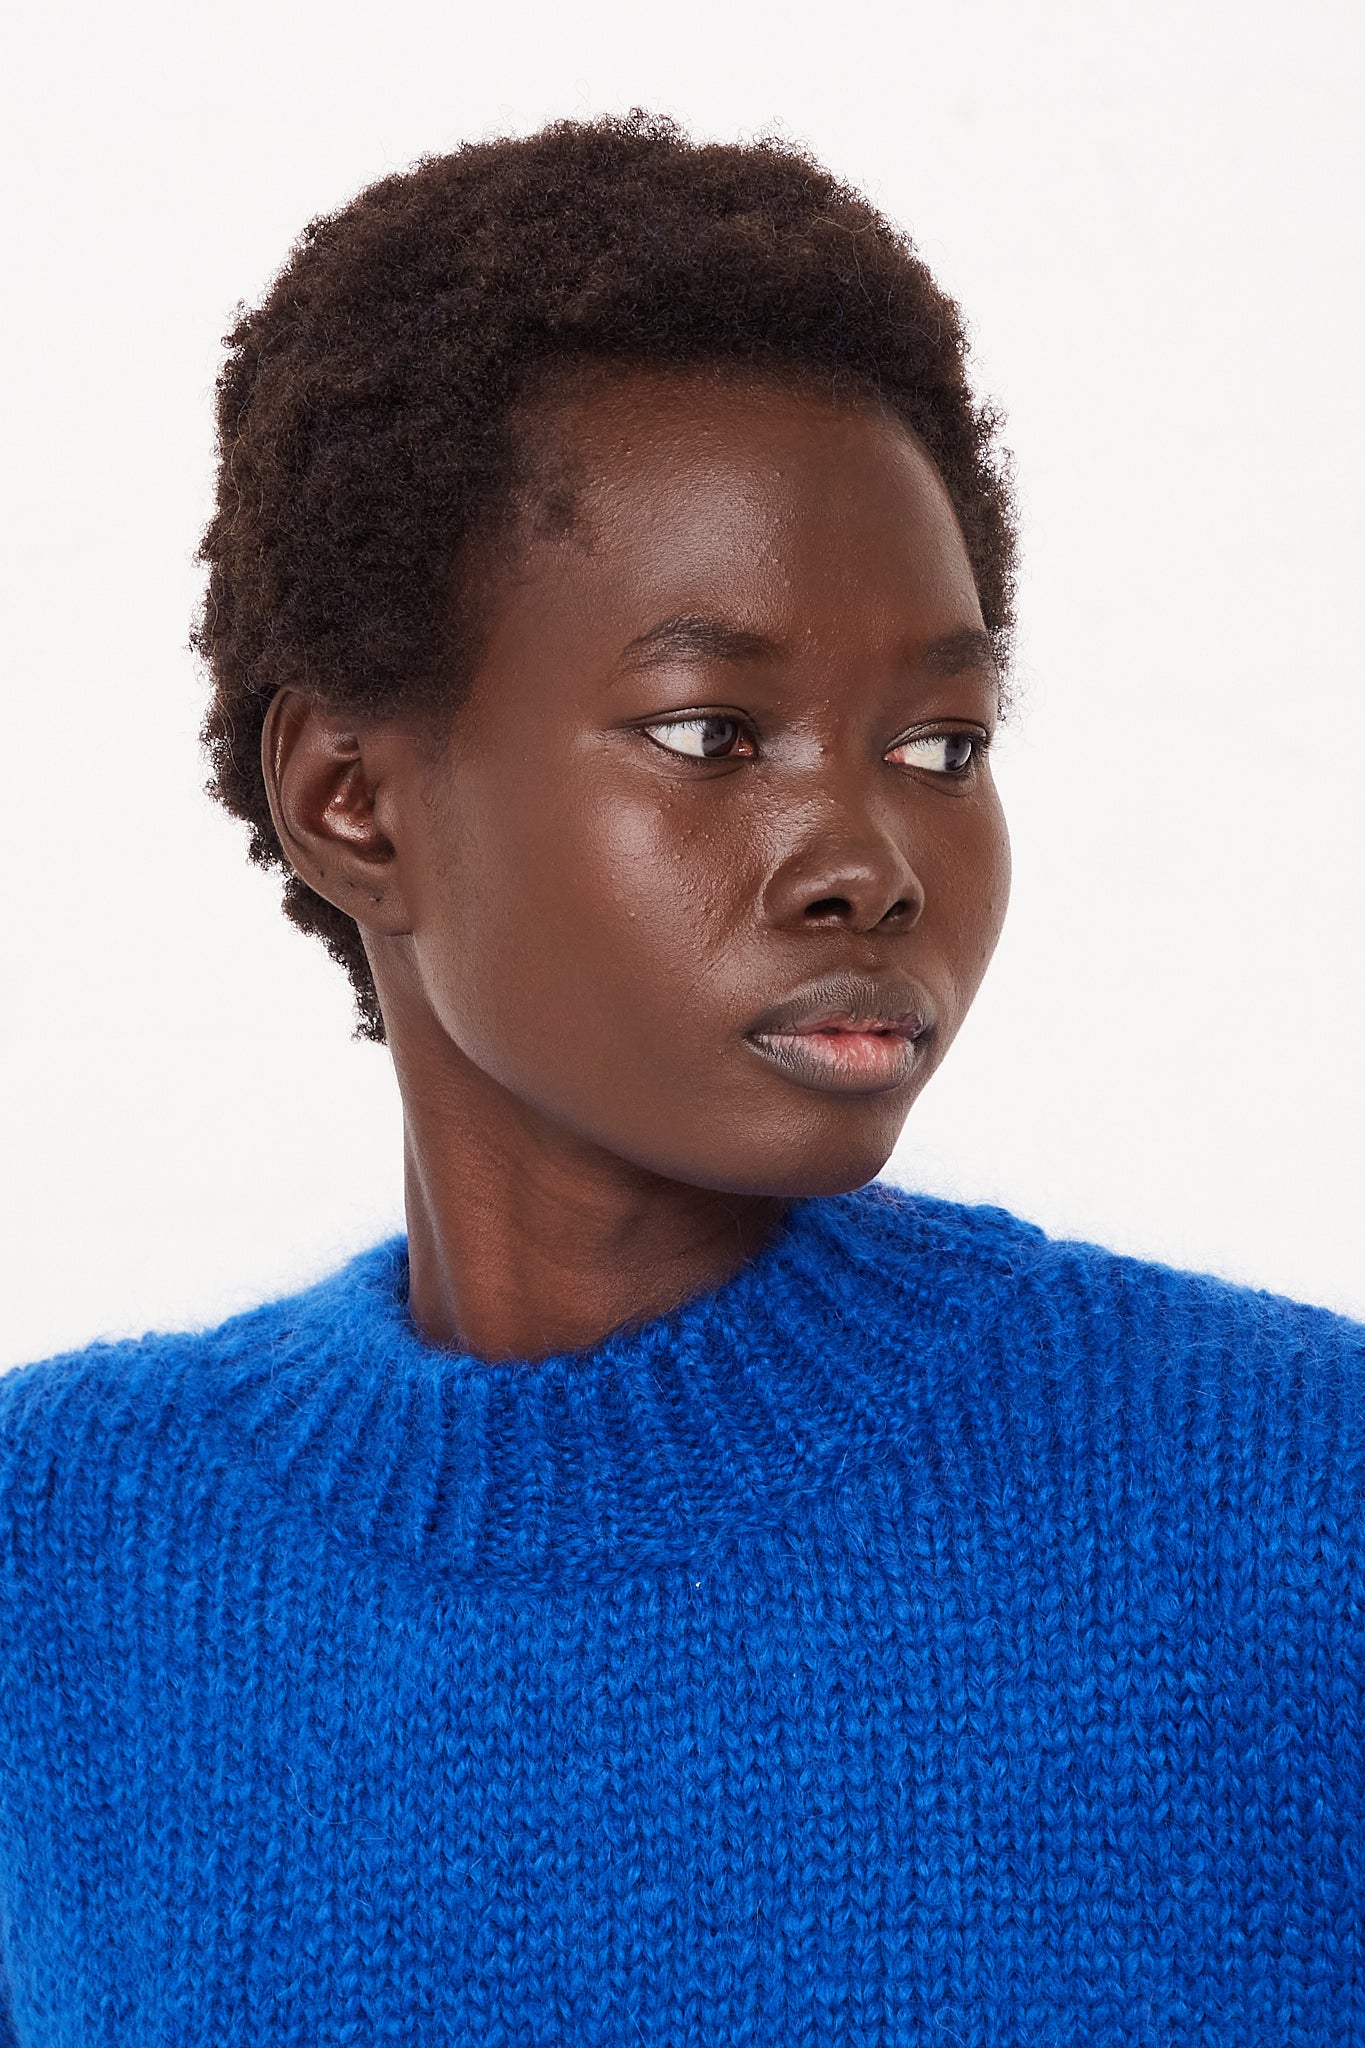 CORDERA Mohair Sweater in Blue | Oroboro Store | Front view of sweater upclose on model